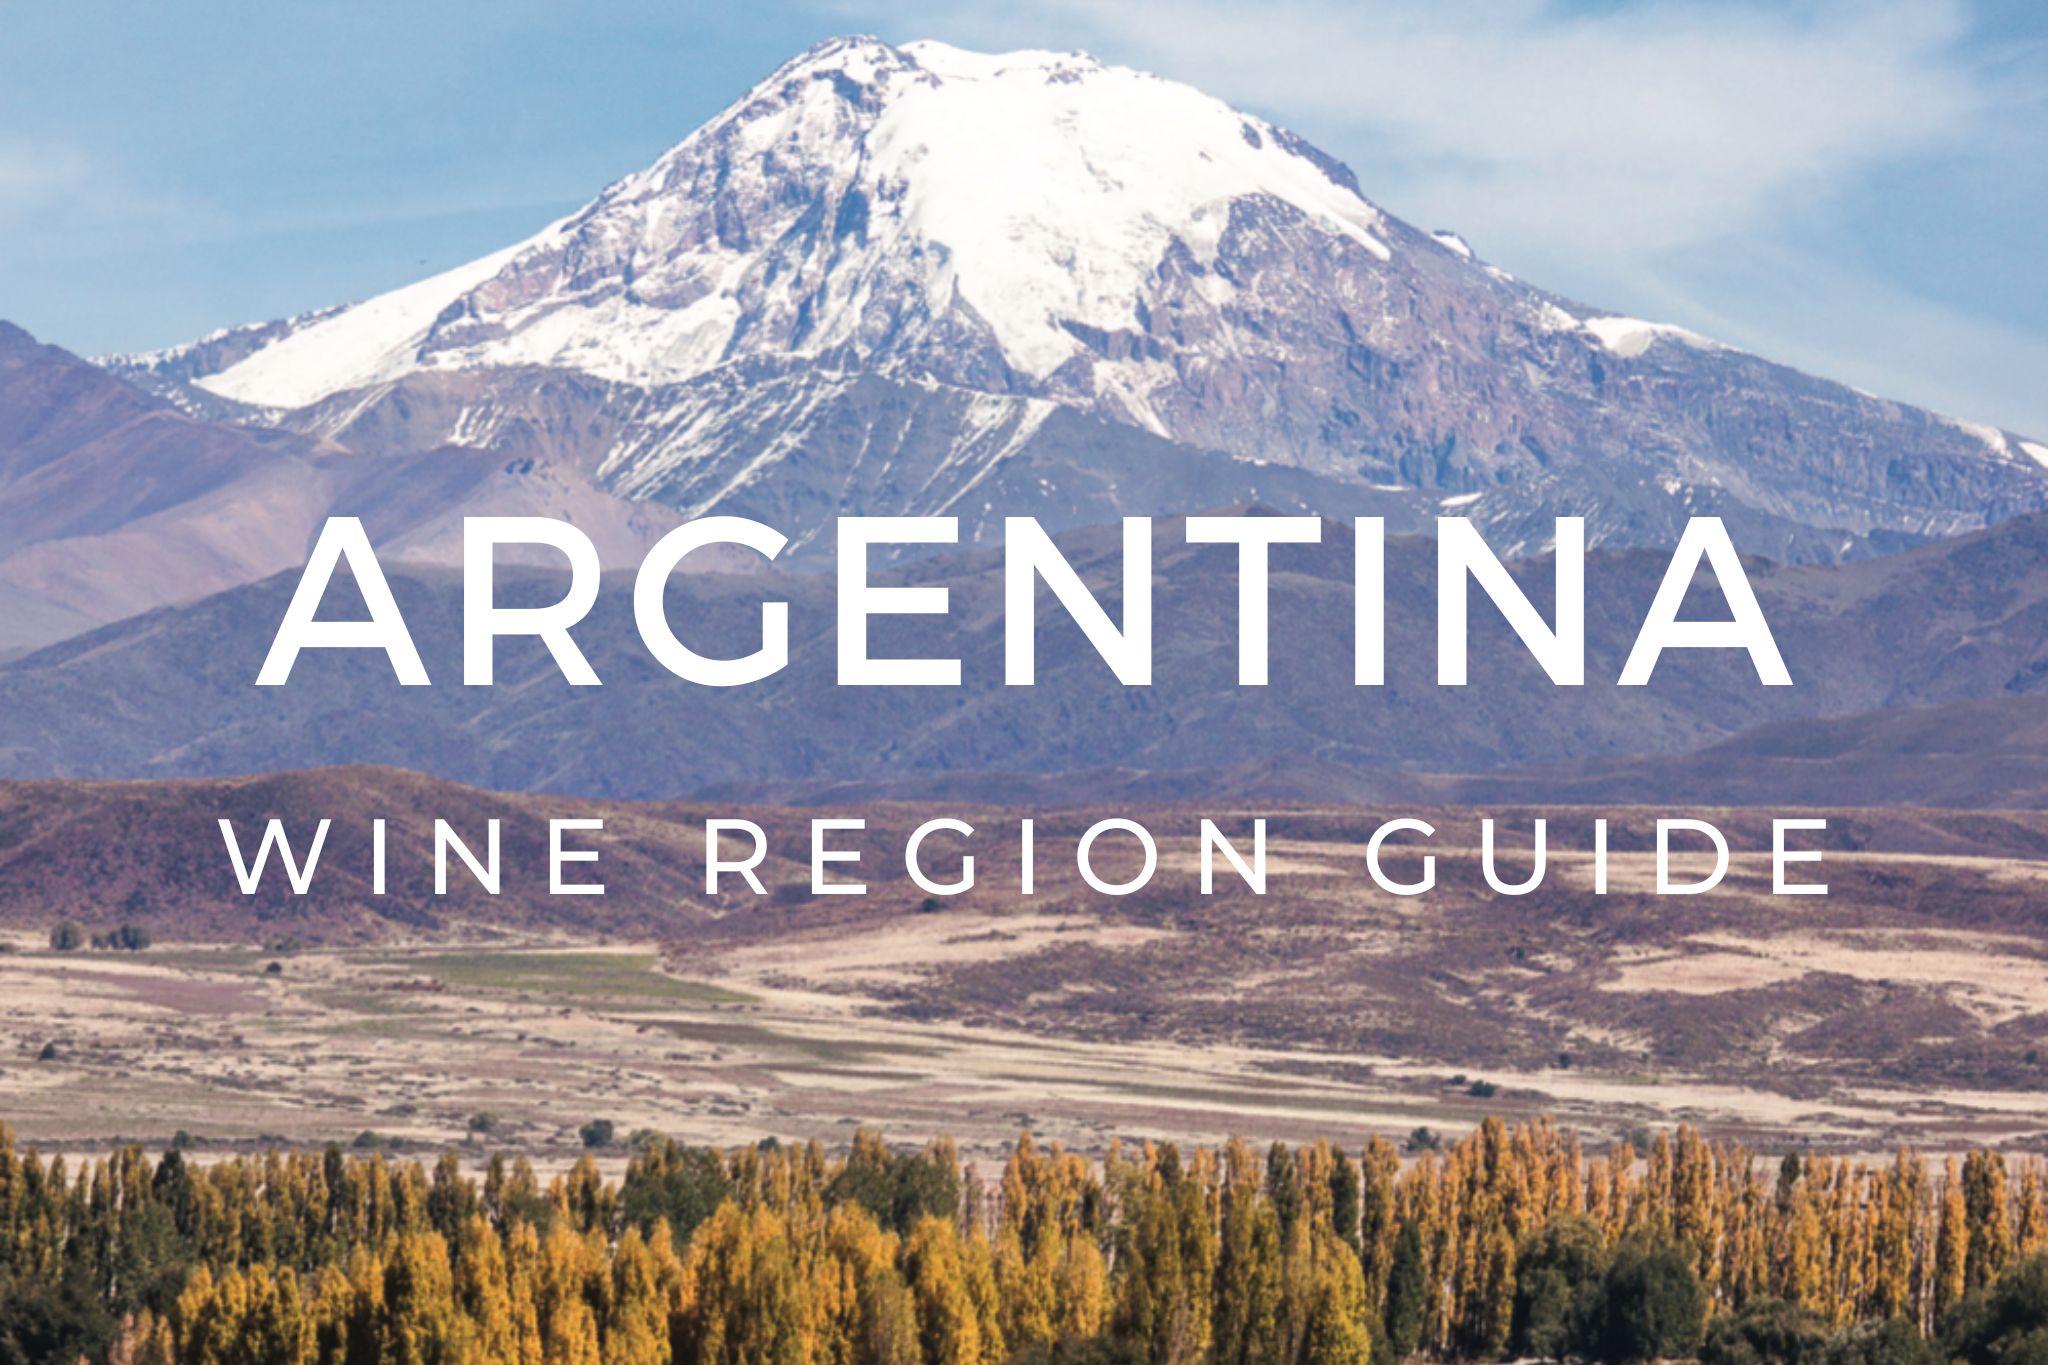 Guide to the wine regions of Argentina - South America Wine Guide